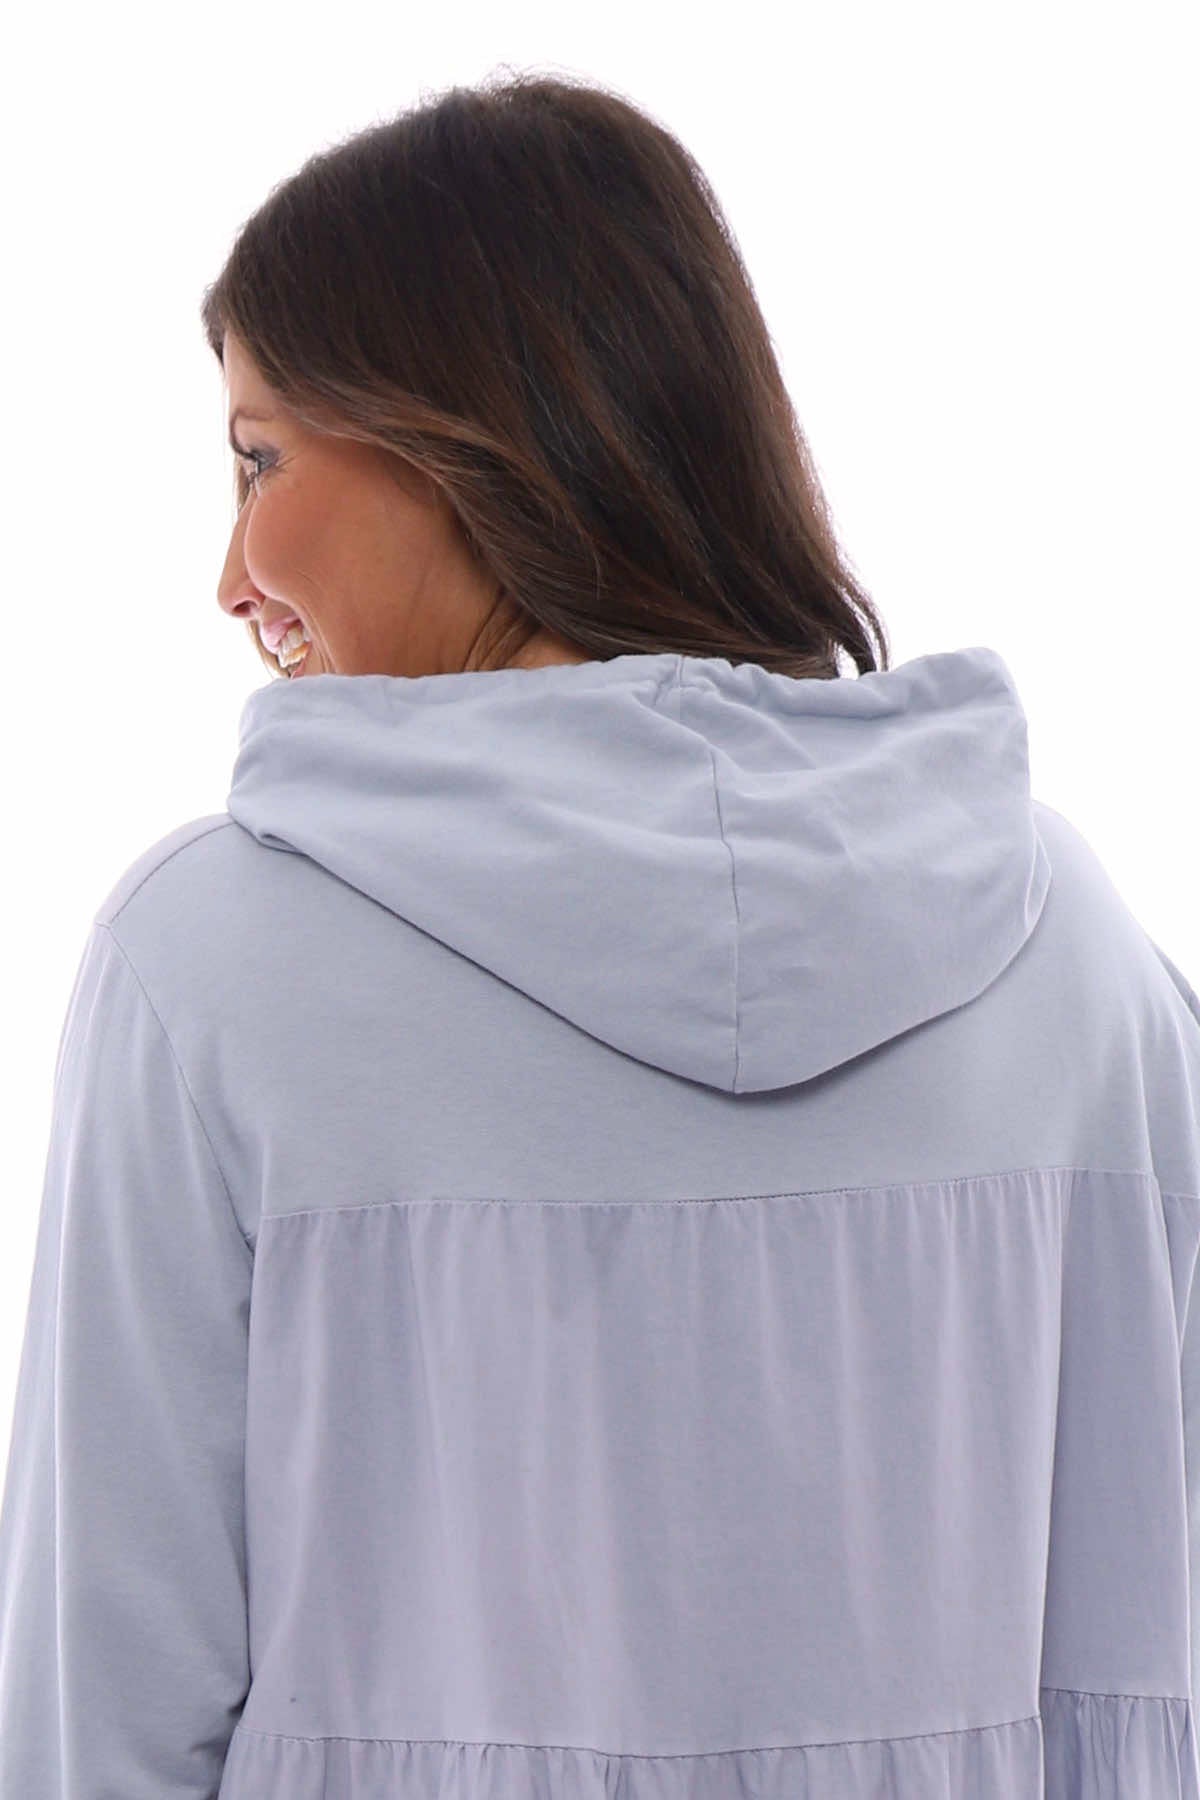 Lily Hooded Cotton Tunic Grey